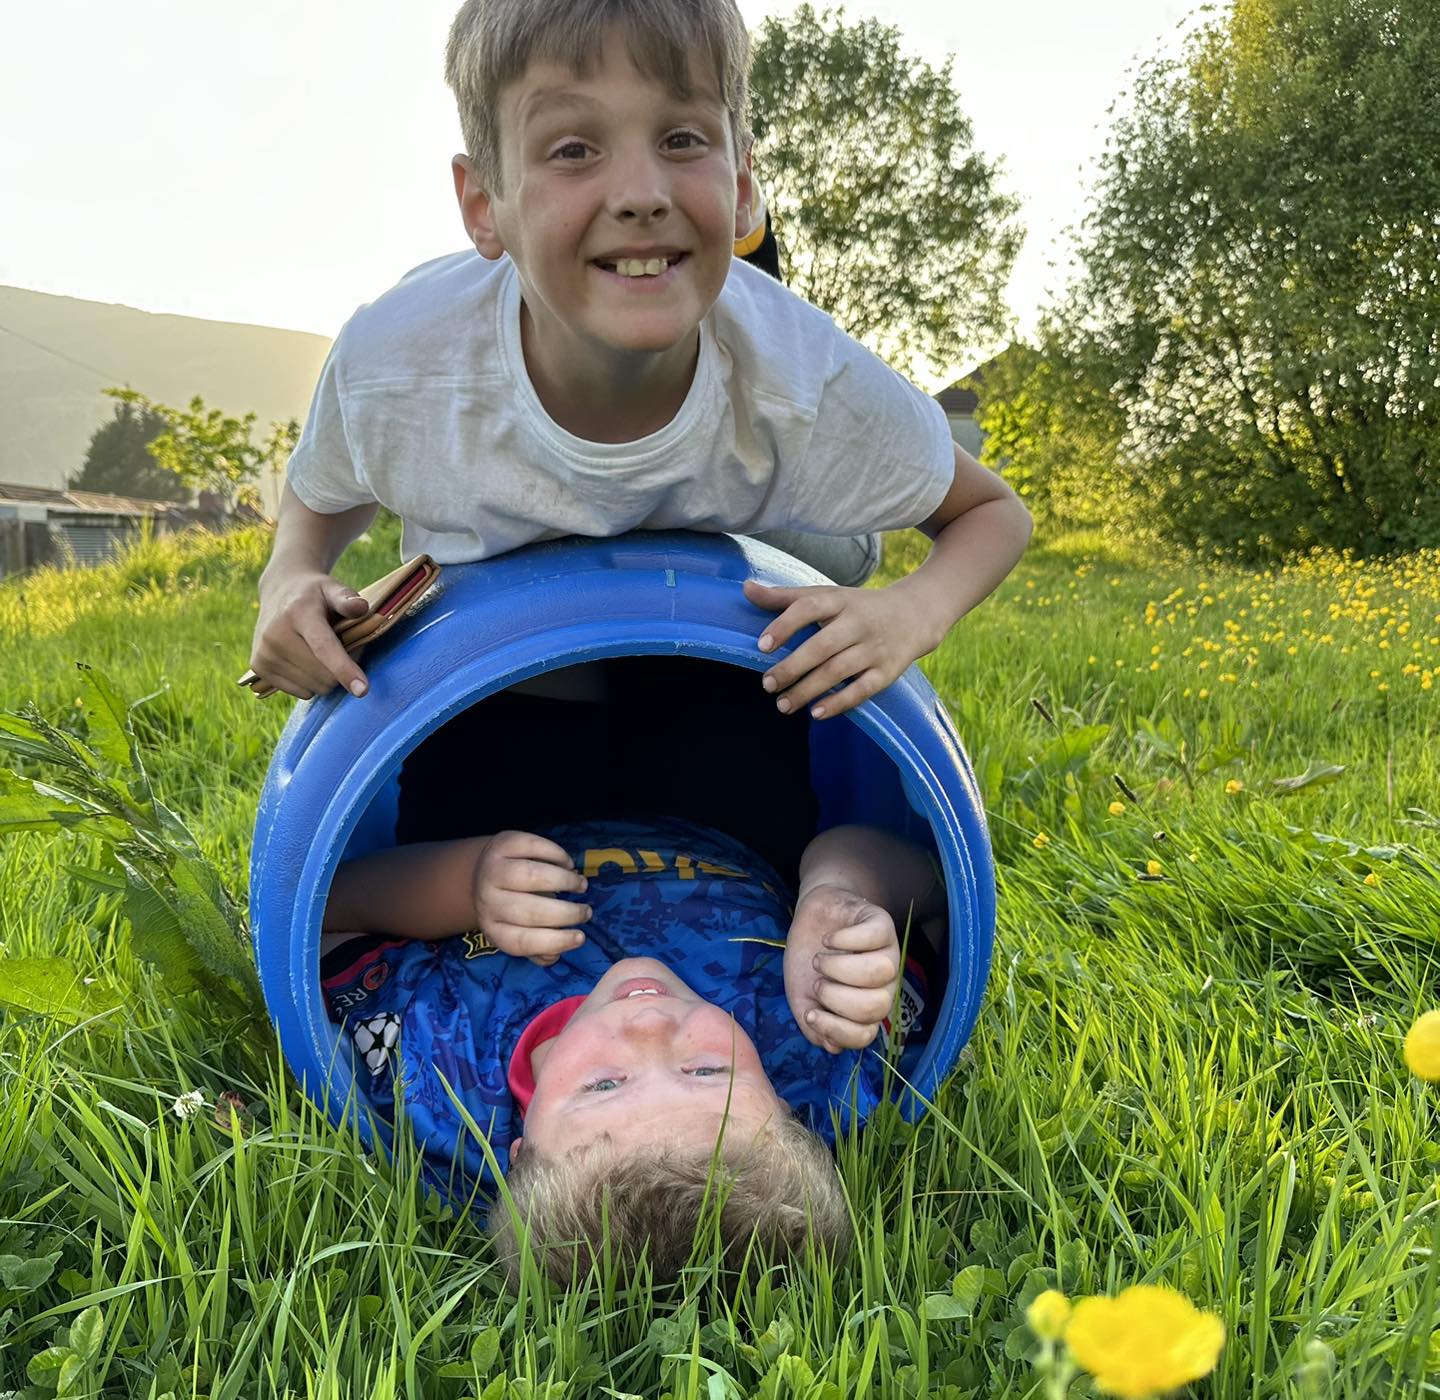 Young boy in a blue tube, with another boy on top of the tube